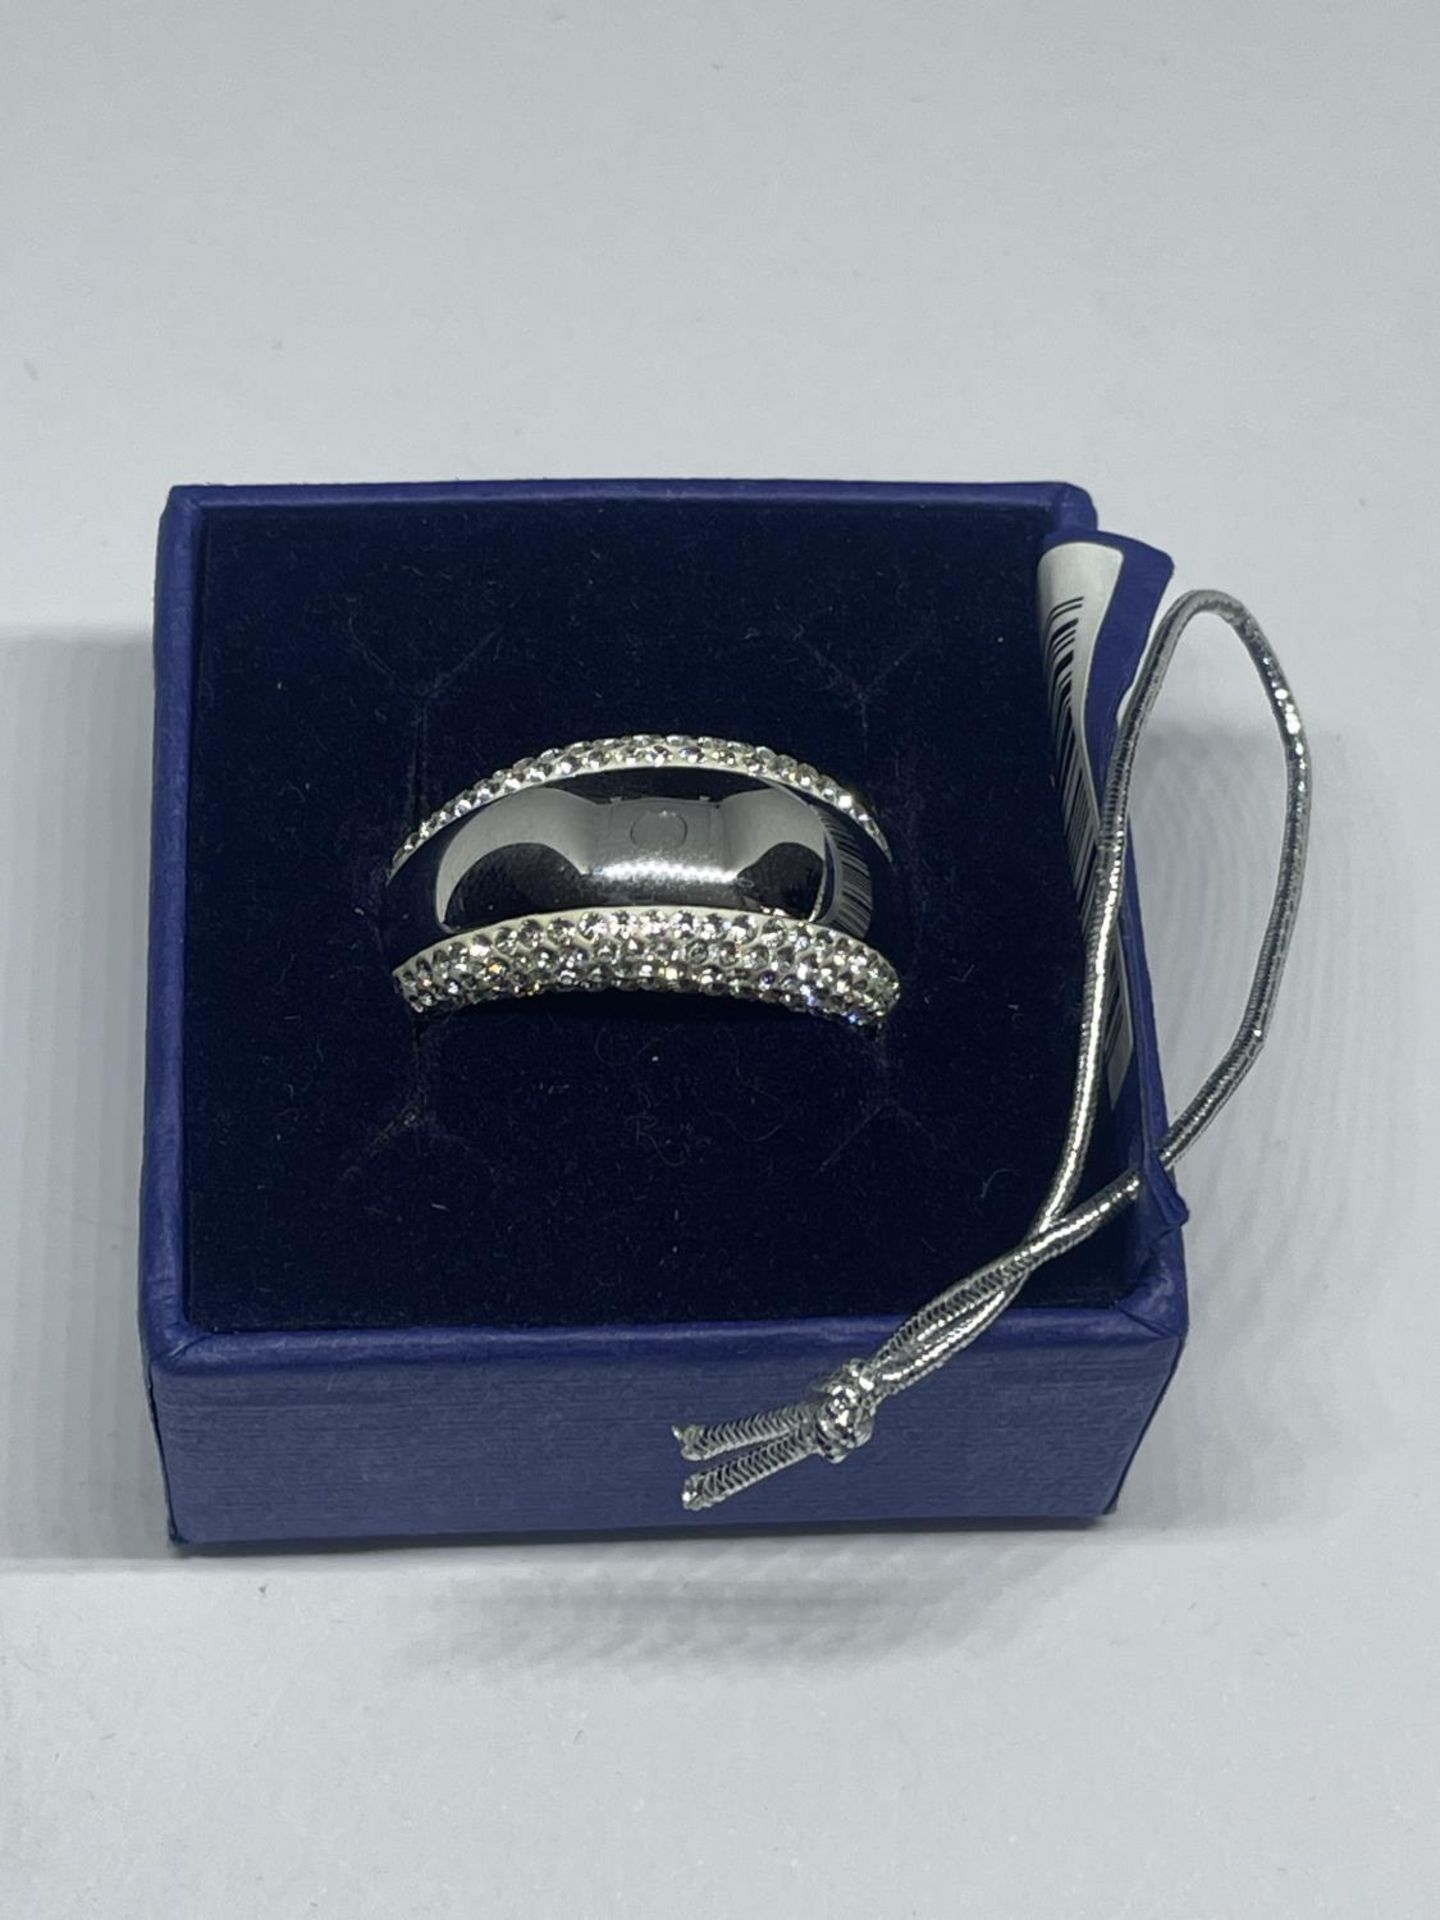 A SWAROVSKI CRYSTAL RING WITH LABEL IN A PRESENTATION BOX WITH SLEEVE SIZE R - Image 3 of 4